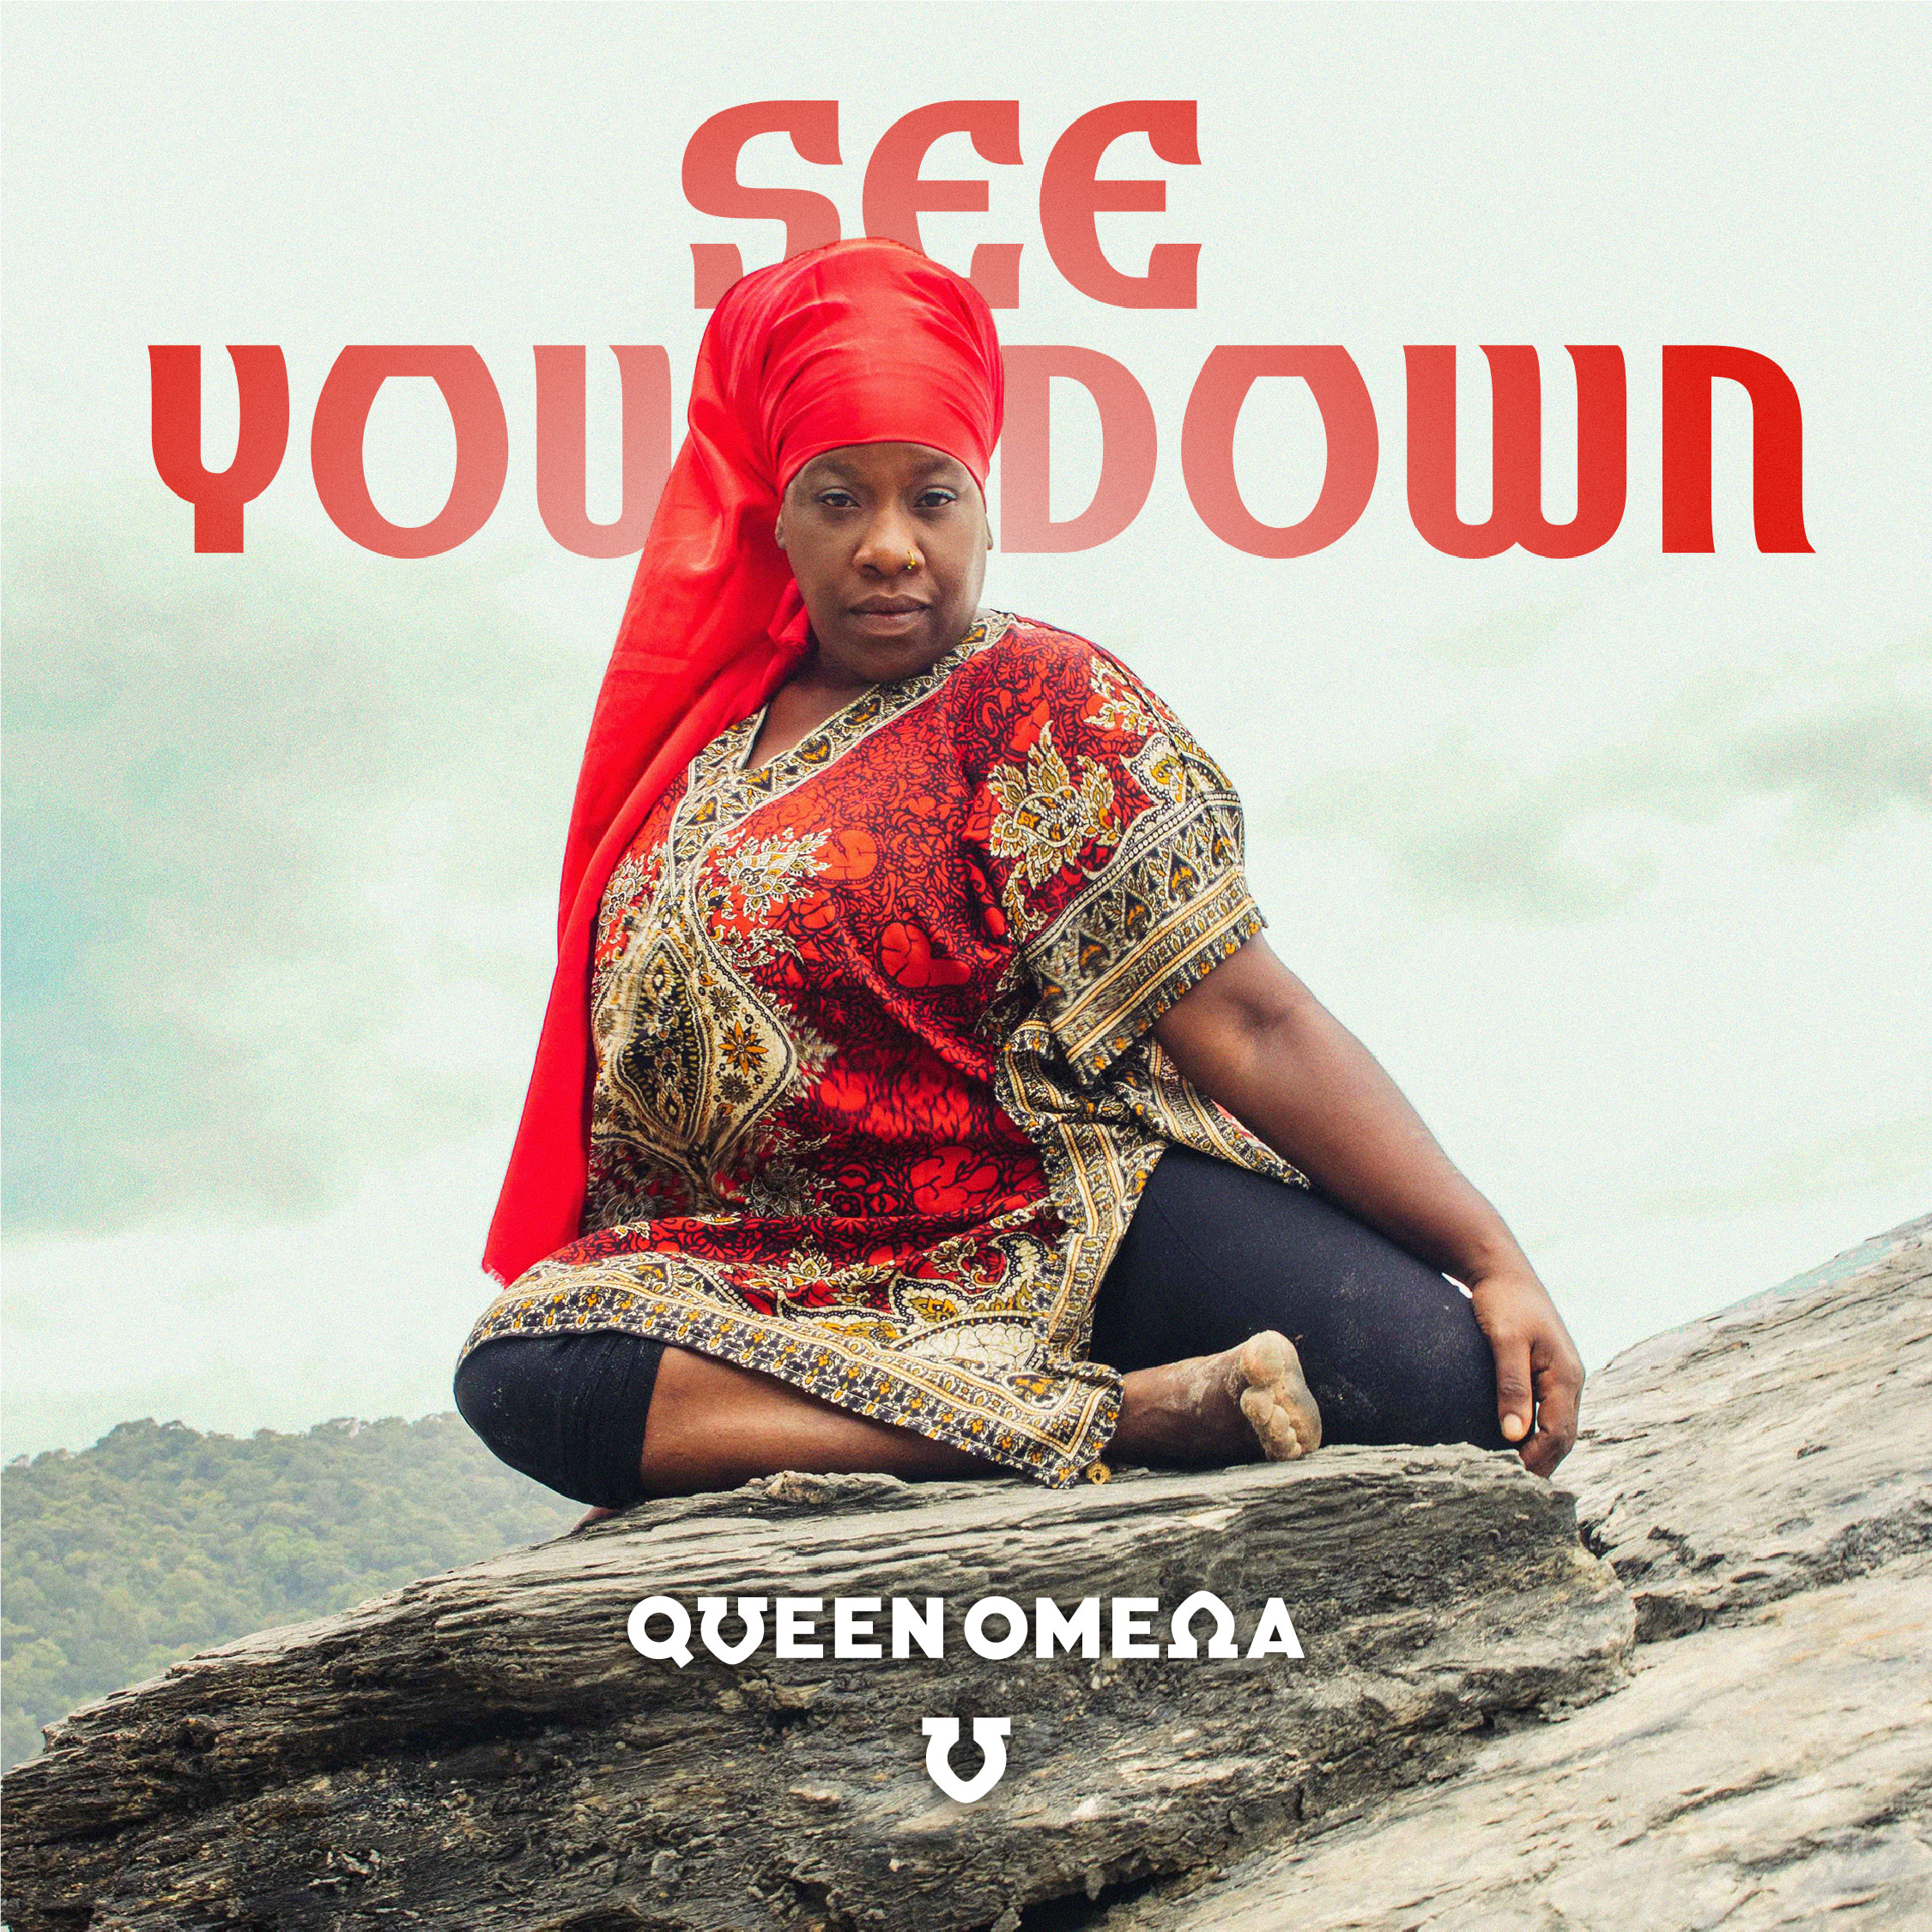 Queen Omega: ‘See You Down’